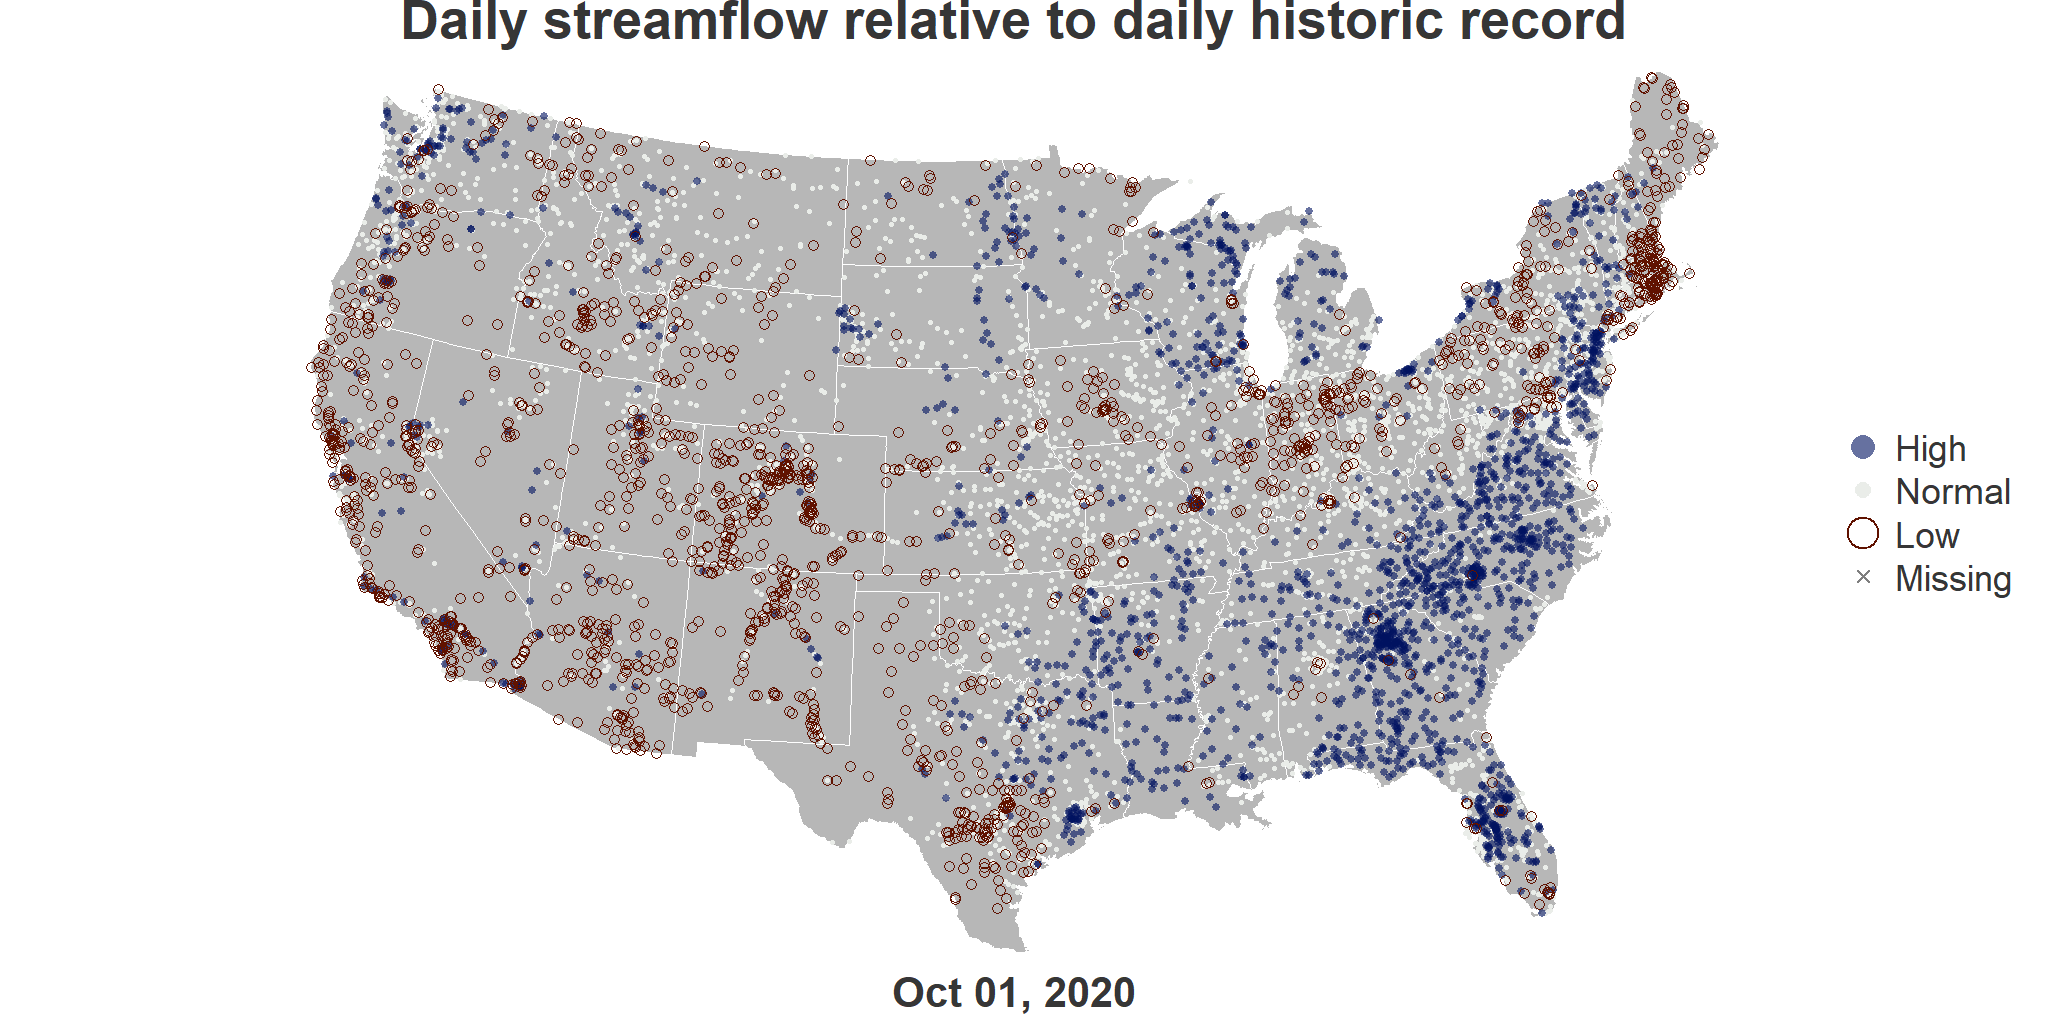 Map depicting October 1, 2020 streamflow data with points colored red for low flow (less than 25th percentile), white for normal, and blue for high flow (greater than or equal to 75th percentile).